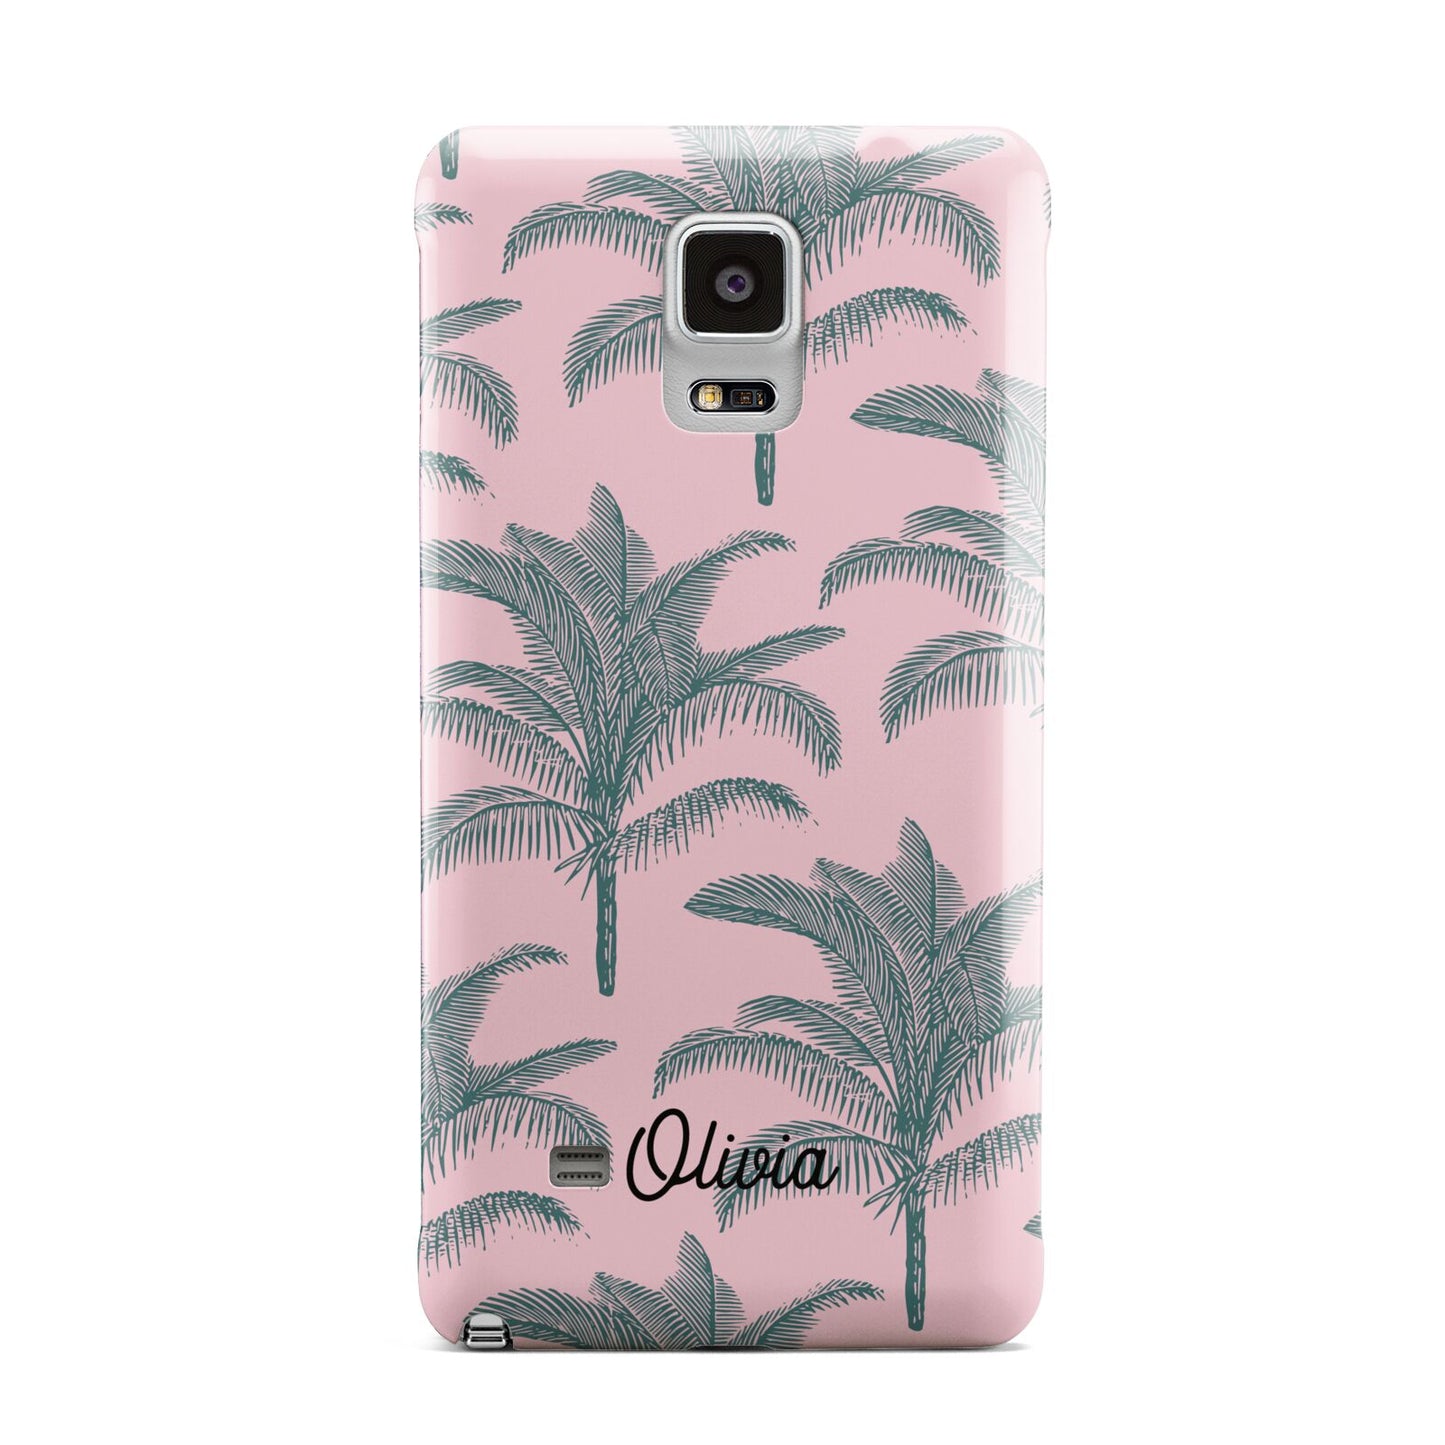 Personalised Palm Samsung Galaxy Note 4 Case